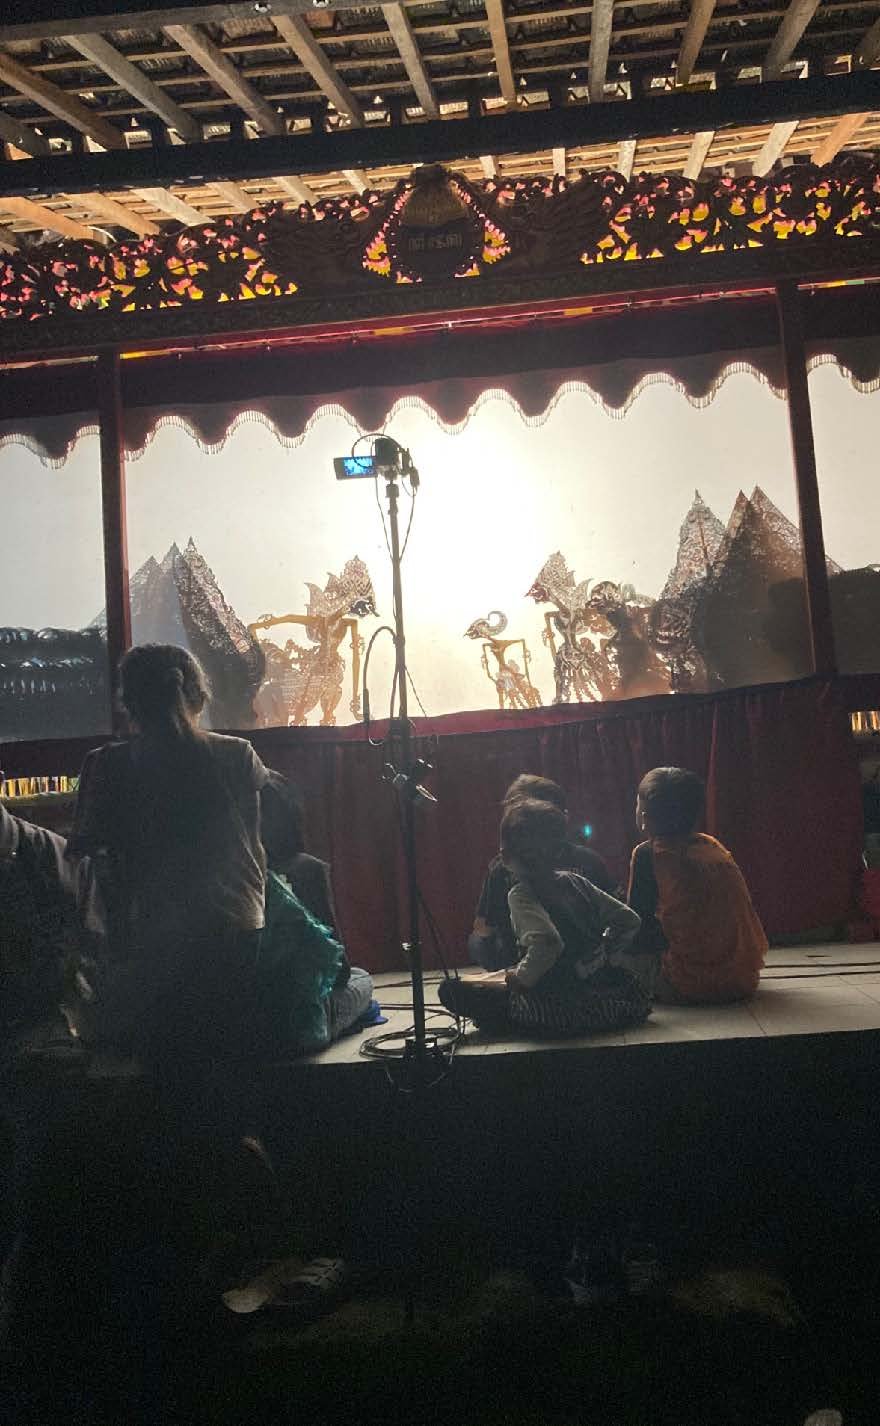 Wayang kulit from in front of the screen